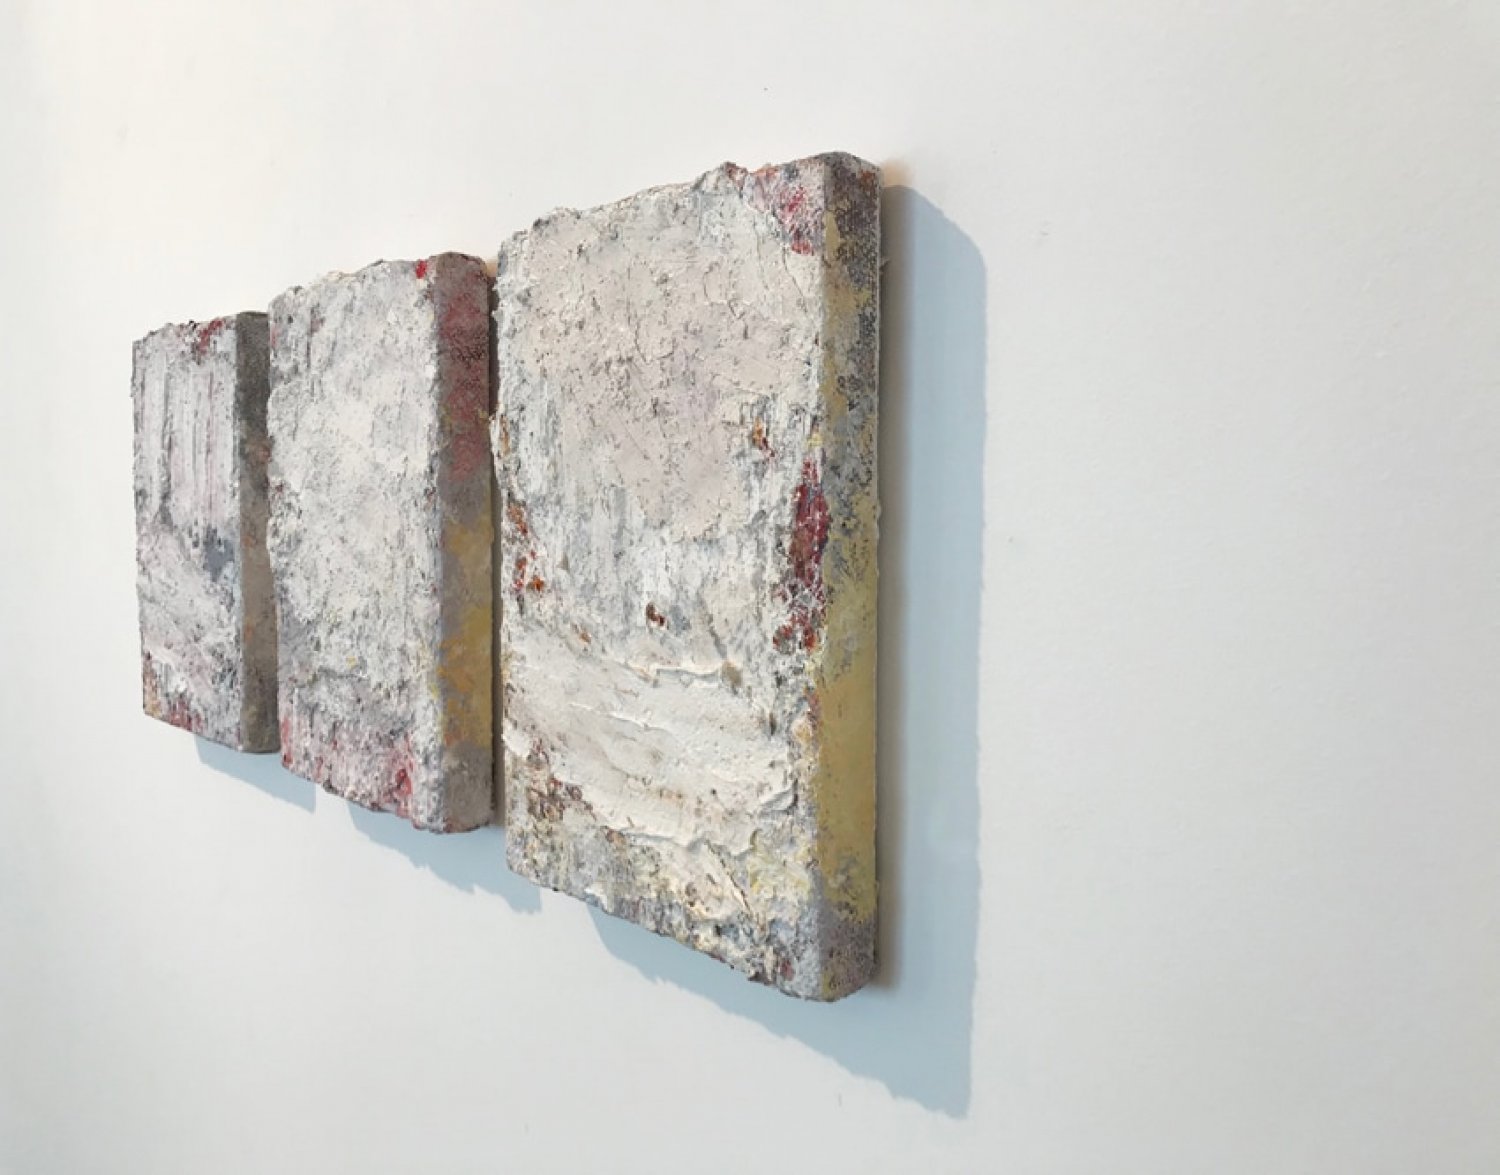 Aida Tomescu, Left: In a carpet made of water I, 2017 oil, silver pigment on Belgian linen, 36 x26 cm. Middle: In a carpet made of water II, 2017 oil, silver pigment on Belgian linen, 36 x26 cm. Right: In a carpet made of water II, 2017 oil, silver pigment on Belgian linen, 36 x26 cm